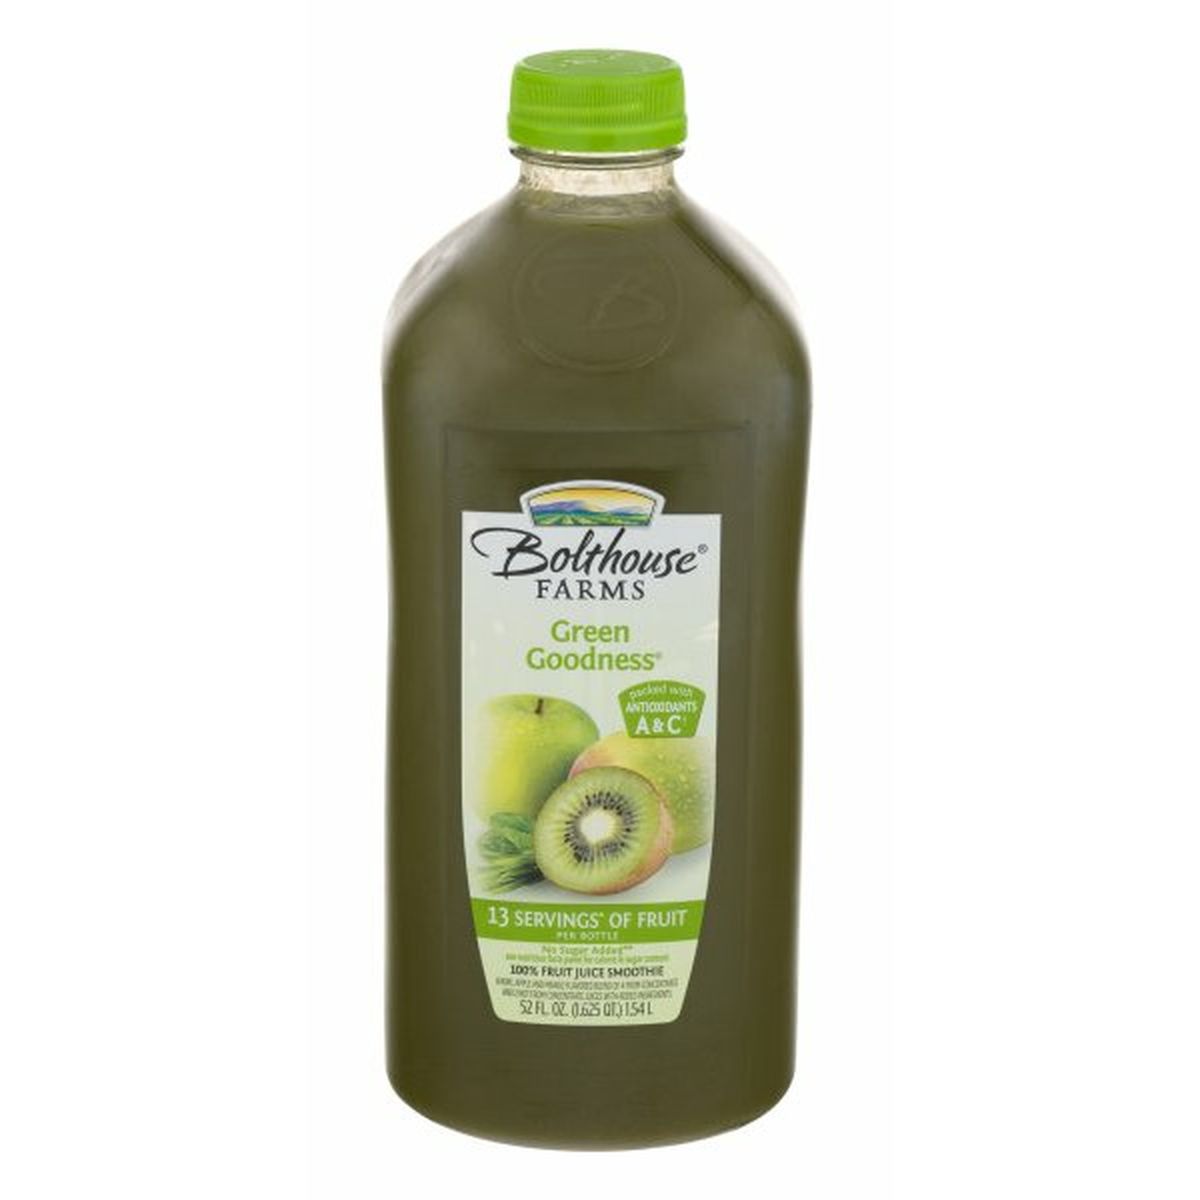 Calories in Bolthouse Farms Green Goodness Green Goodness Juice Smoothie